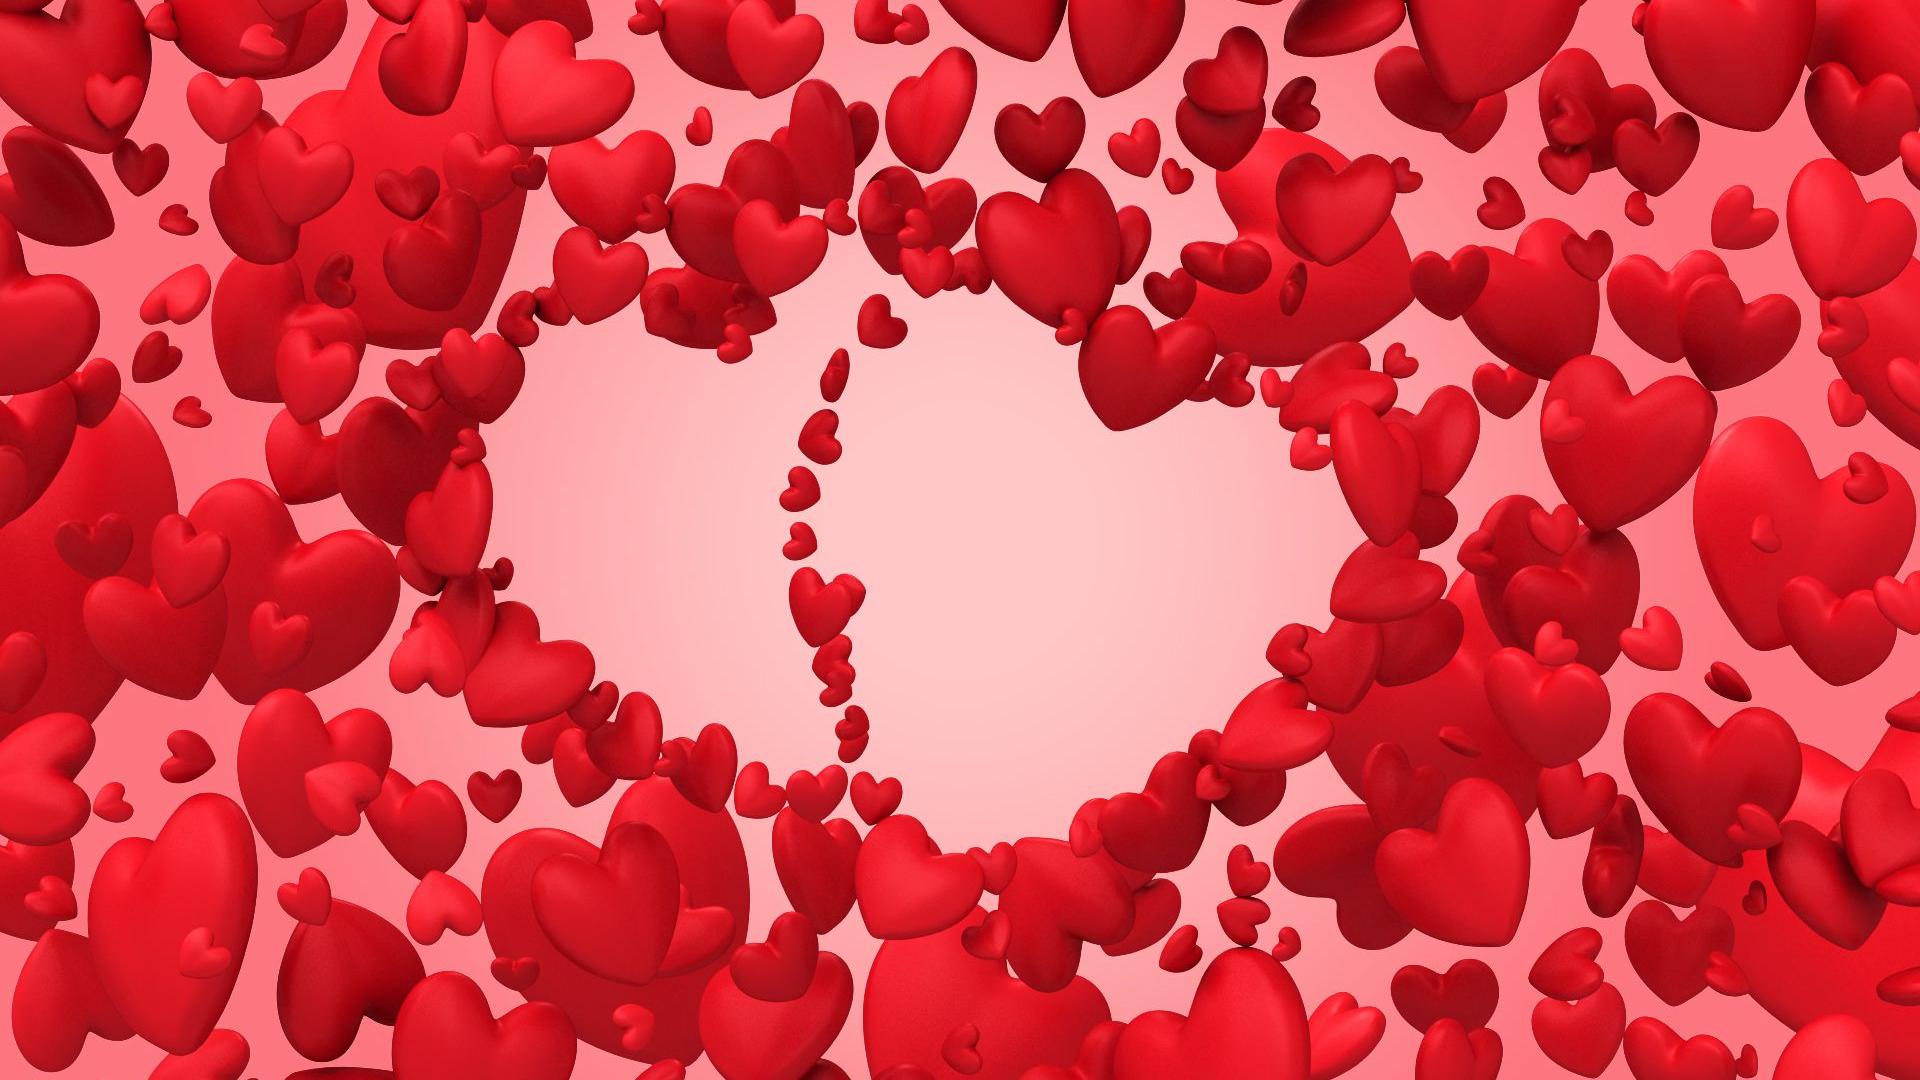 Heart Love Images Full Hd Wallpapers Download Free - Beautiful Red  Background With Hearts - 1920x1080 Wallpaper 